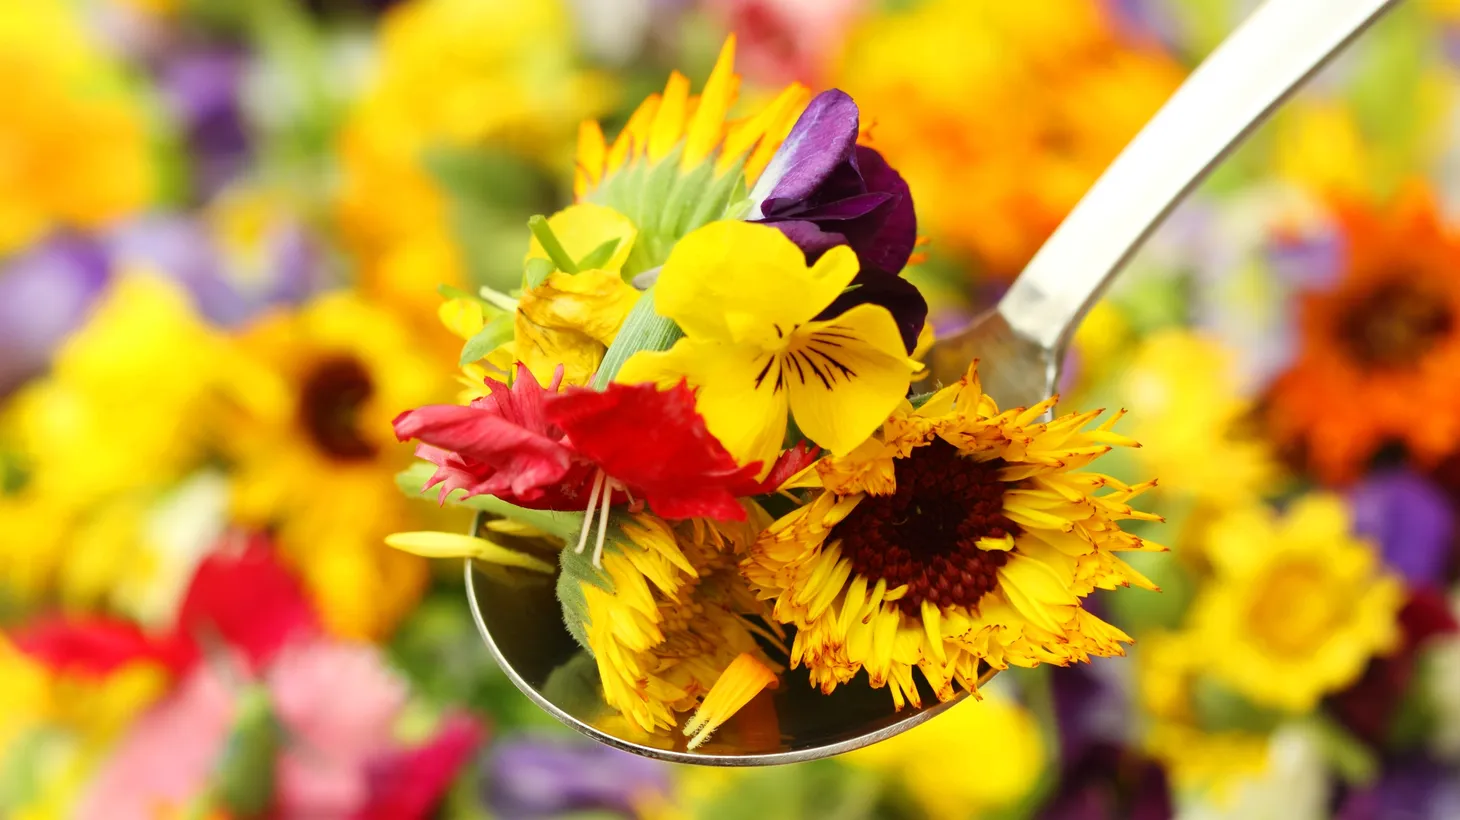 Some flowers aren’t only a visual delight, but enhance the palate as well.